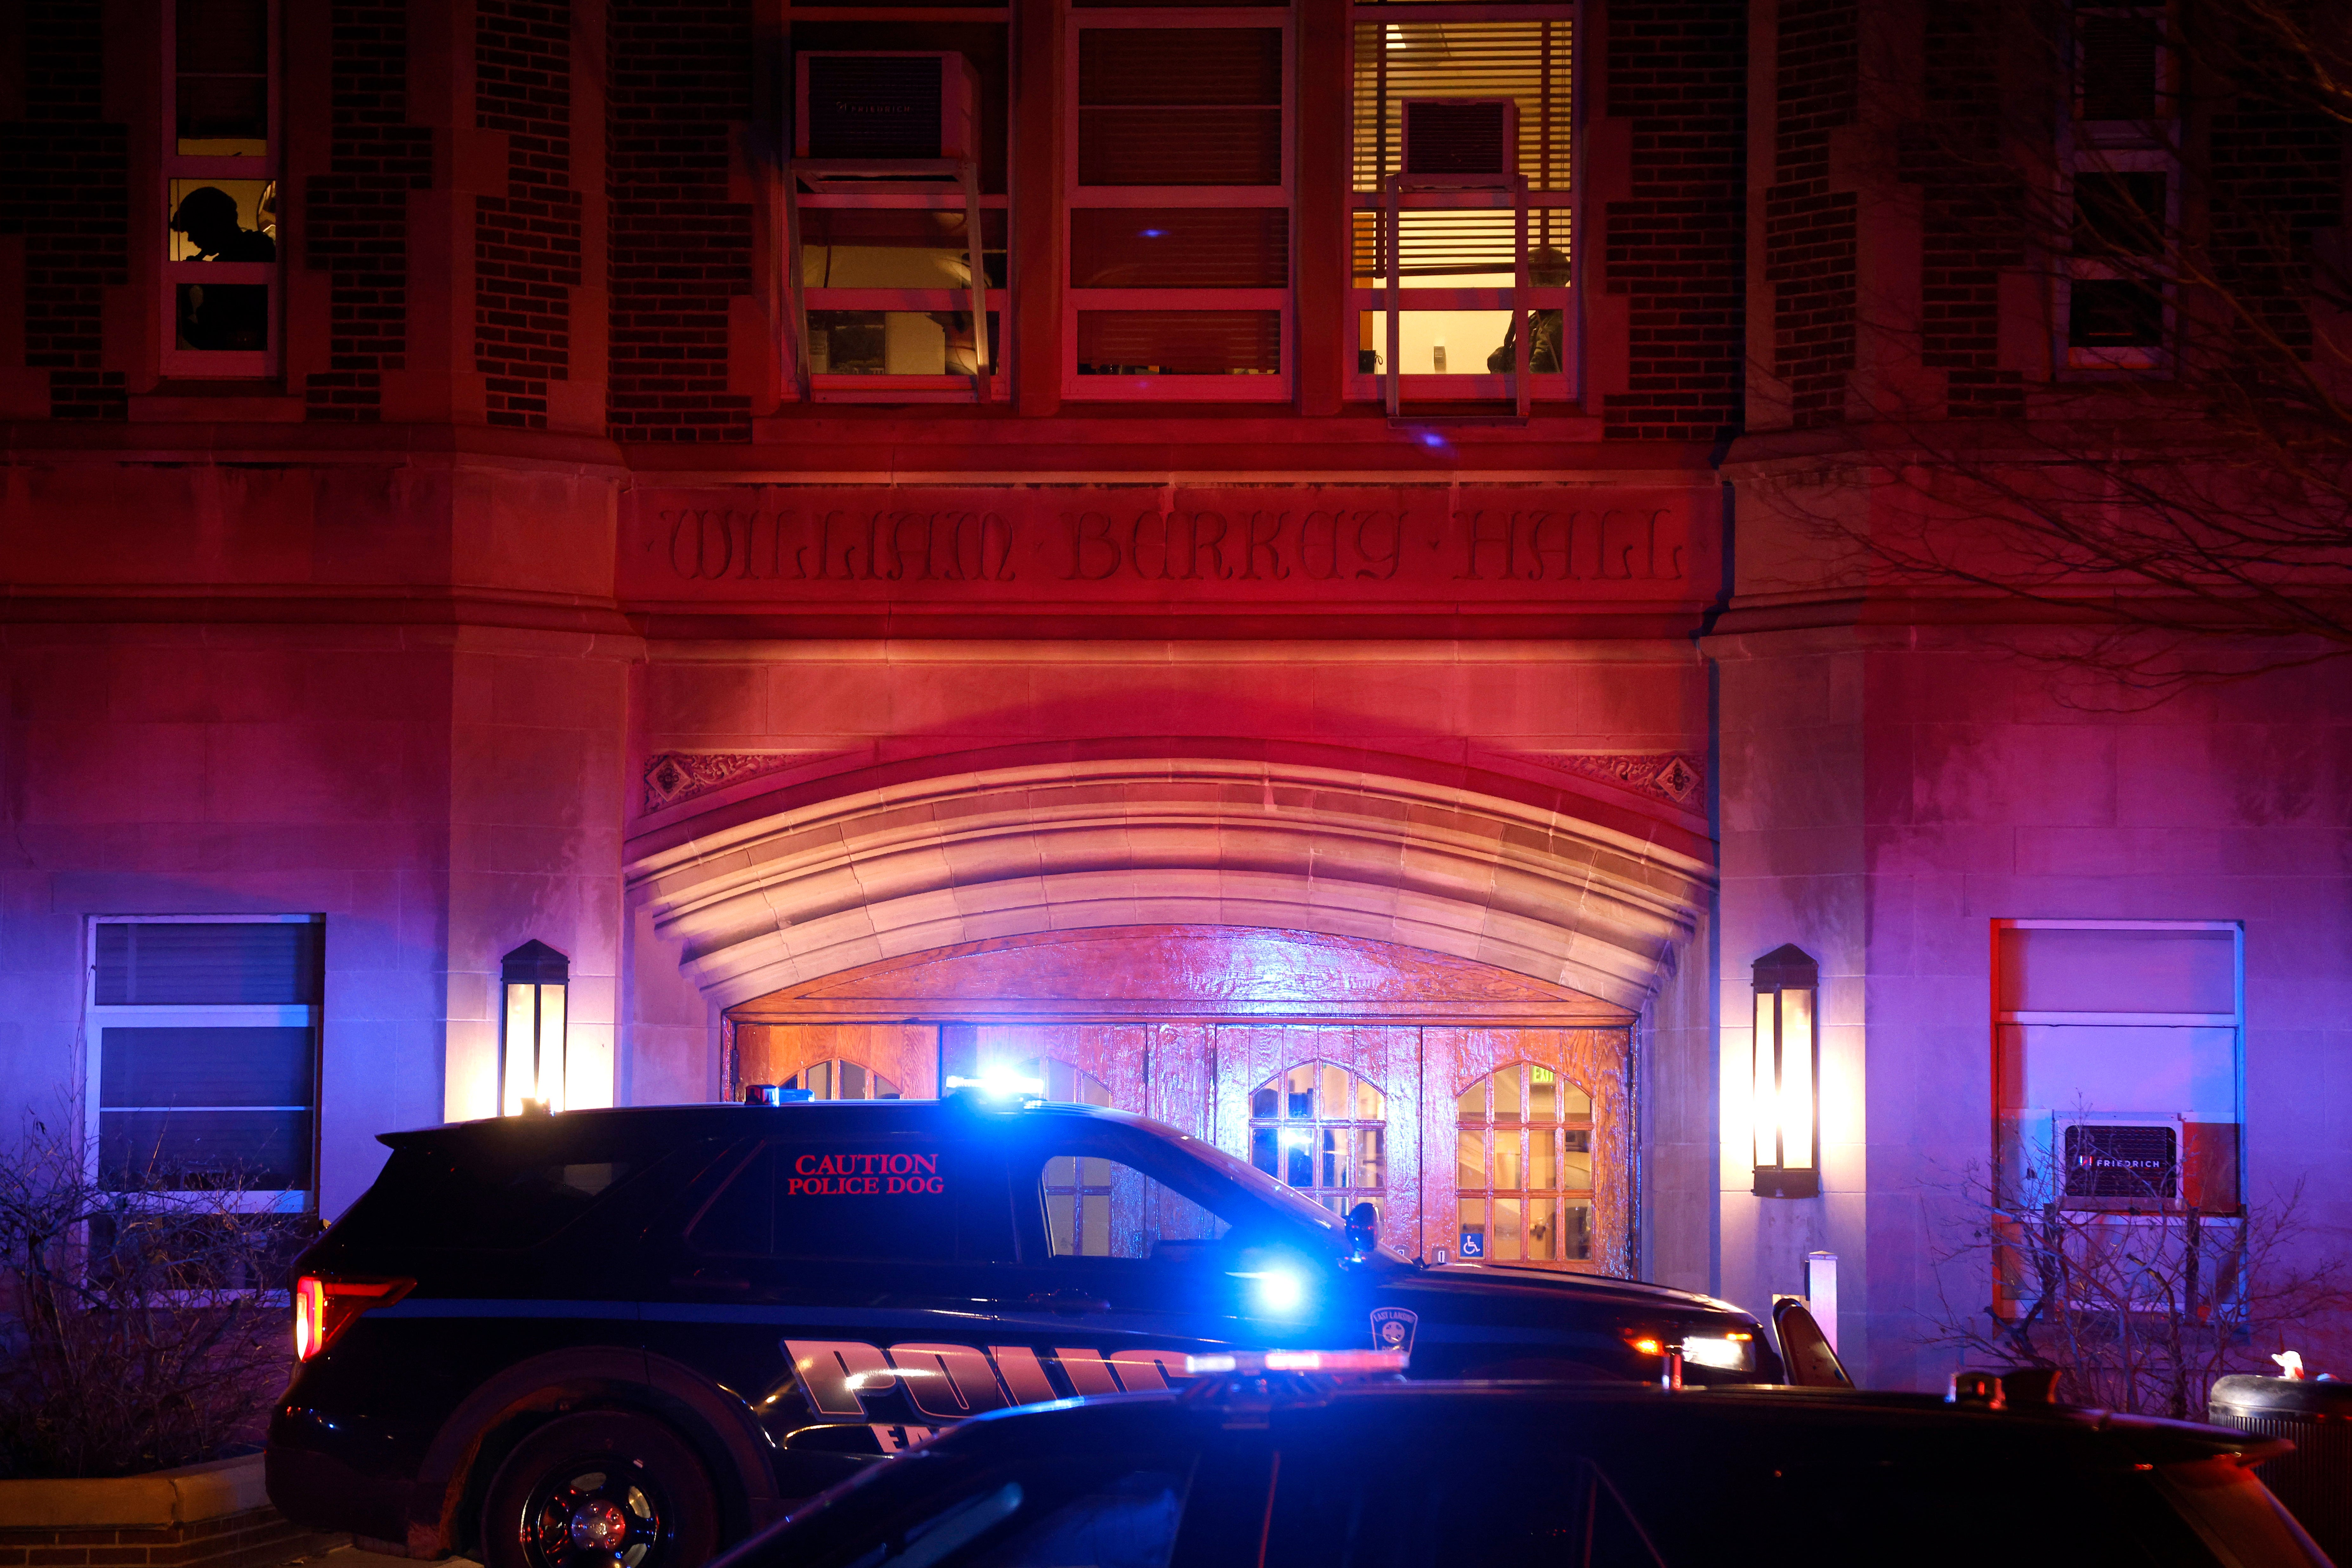 Police investigate the scene of a shooting at Berkey Hall on the campus of Michigan State University, late Monday, 13 February 2023, in East Lansing